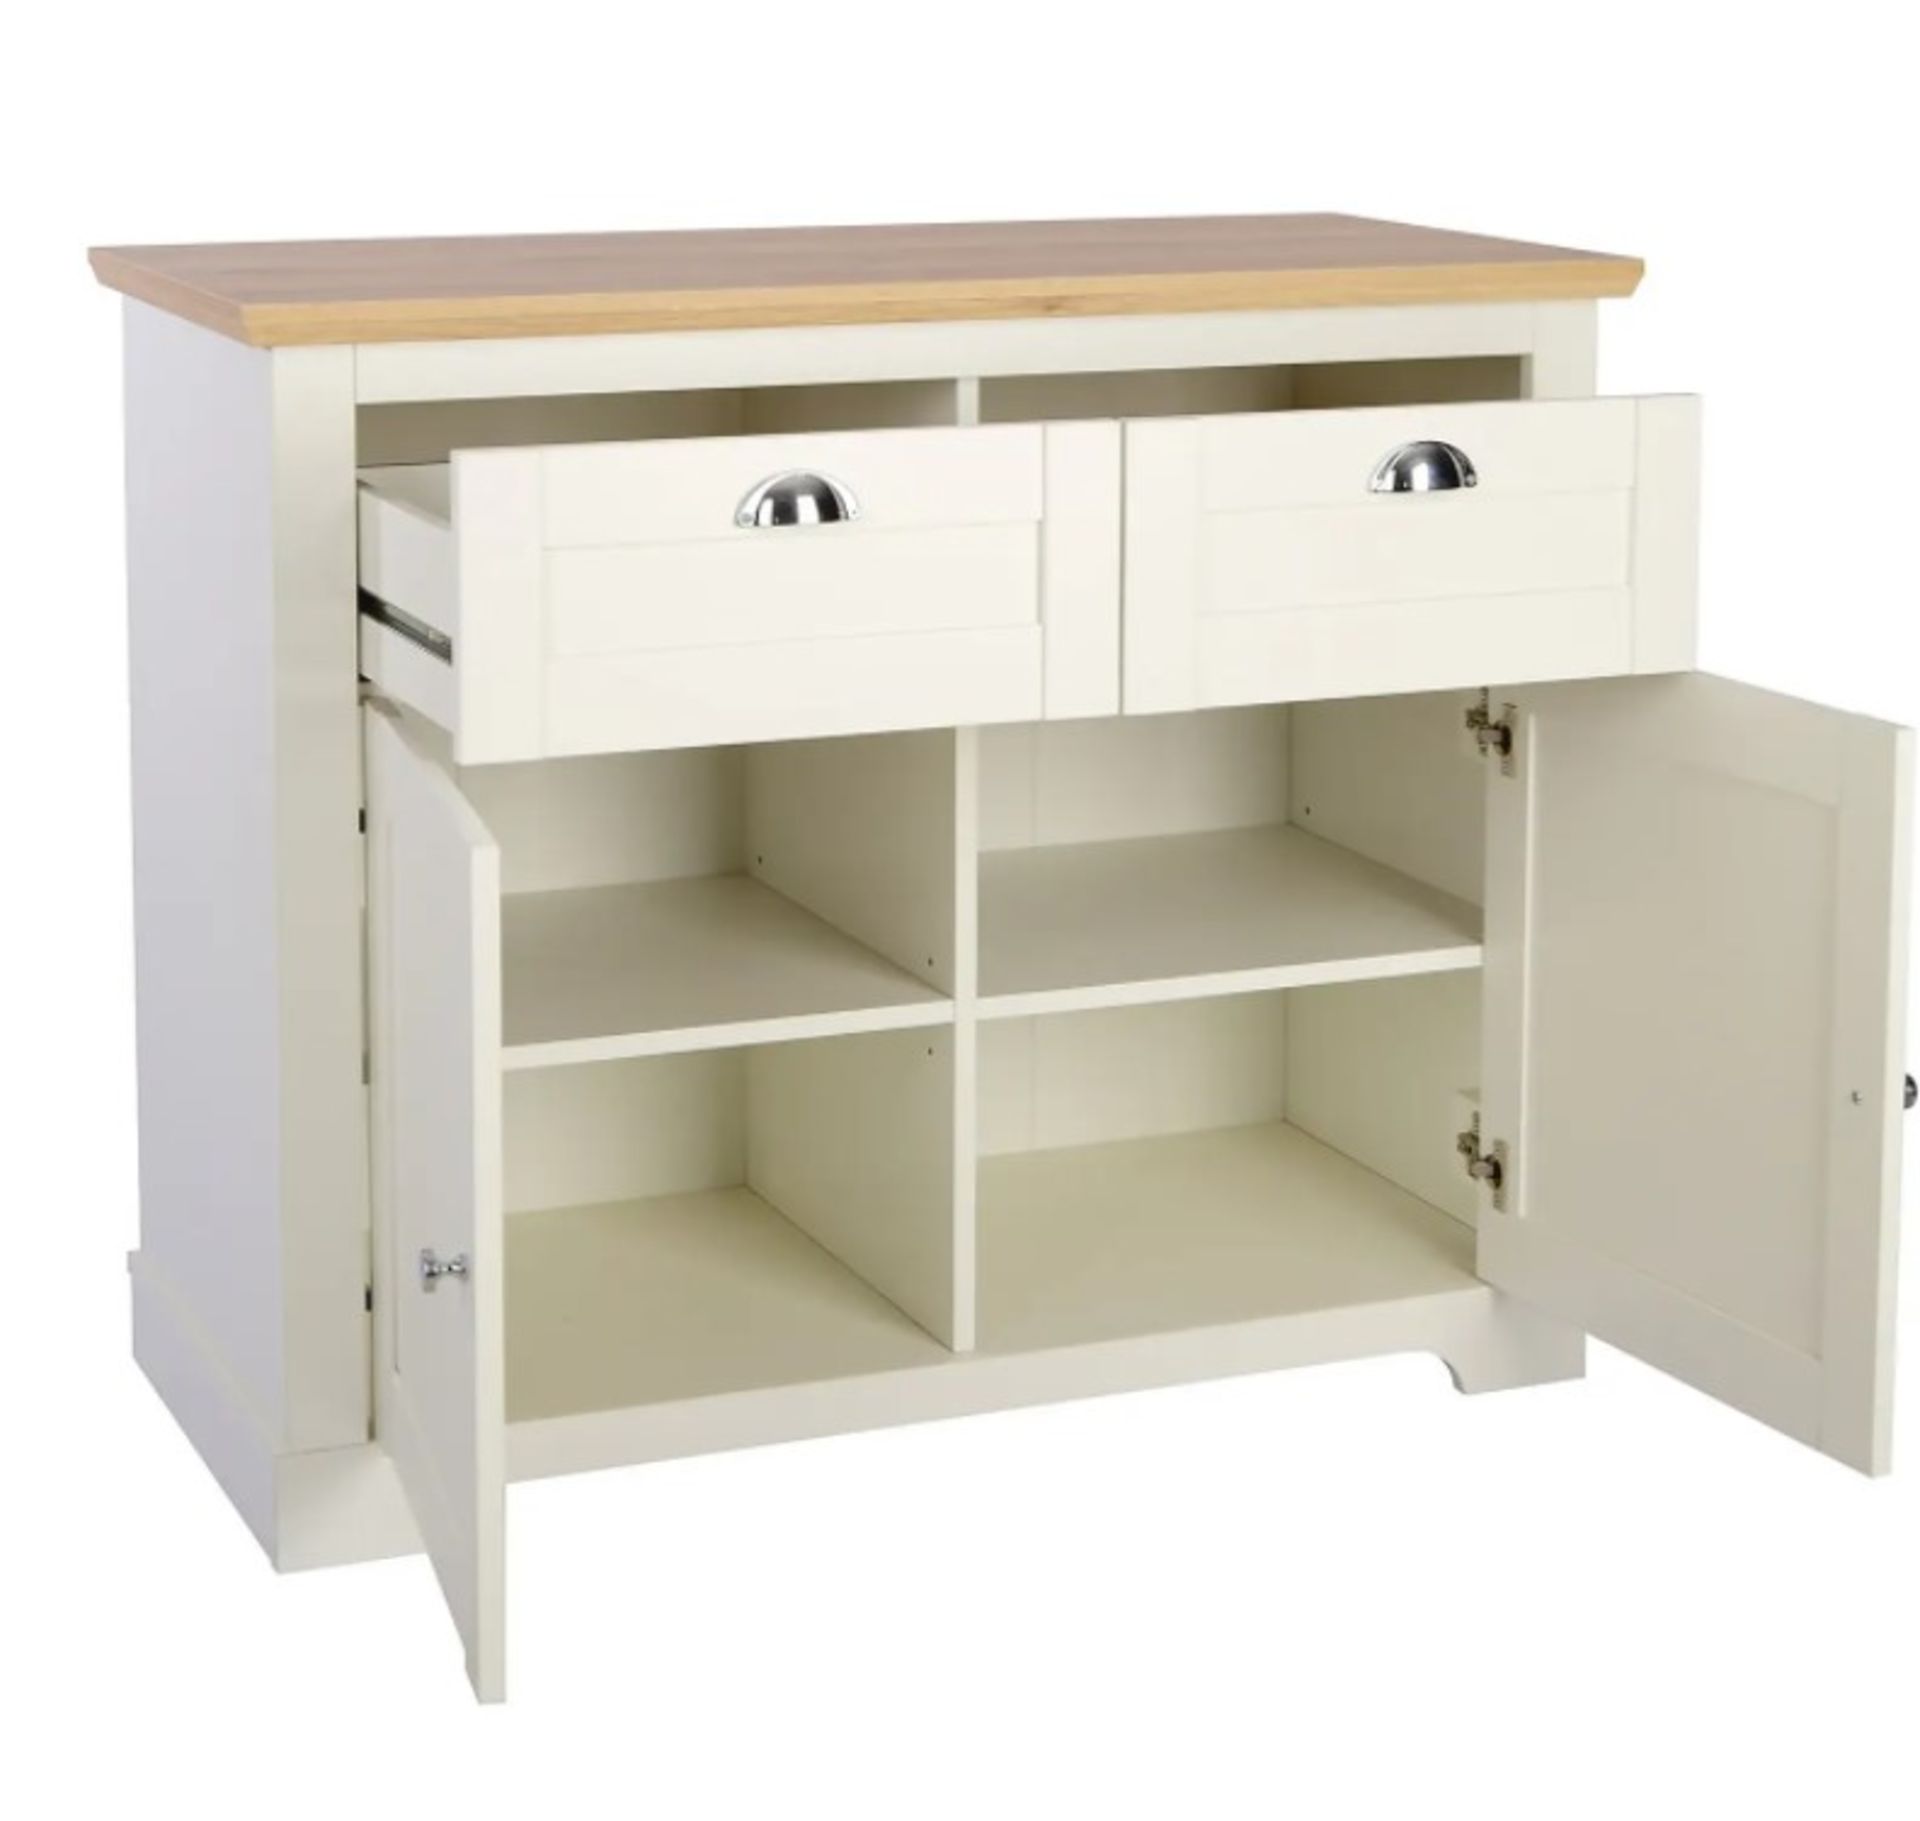 (Mz) 1x Diva Compact Sideboard Ivory RRP £180. (L)100.5 x (W)44.8 x (H)83cm - Image 2 of 3